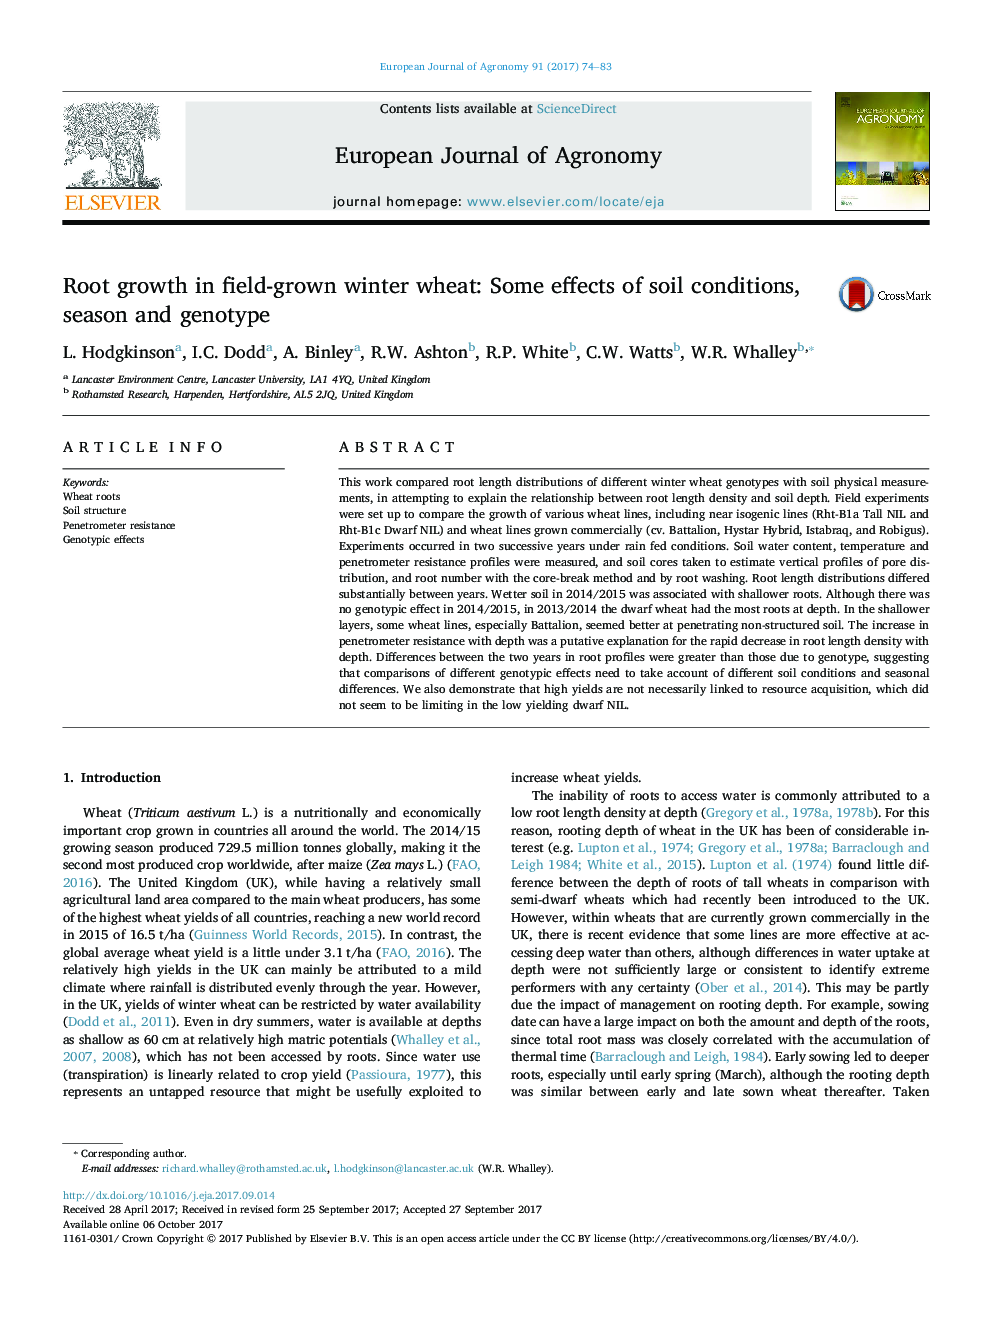 Root growth in field-grown winter wheat: Some effects of soil conditions, season and genotype